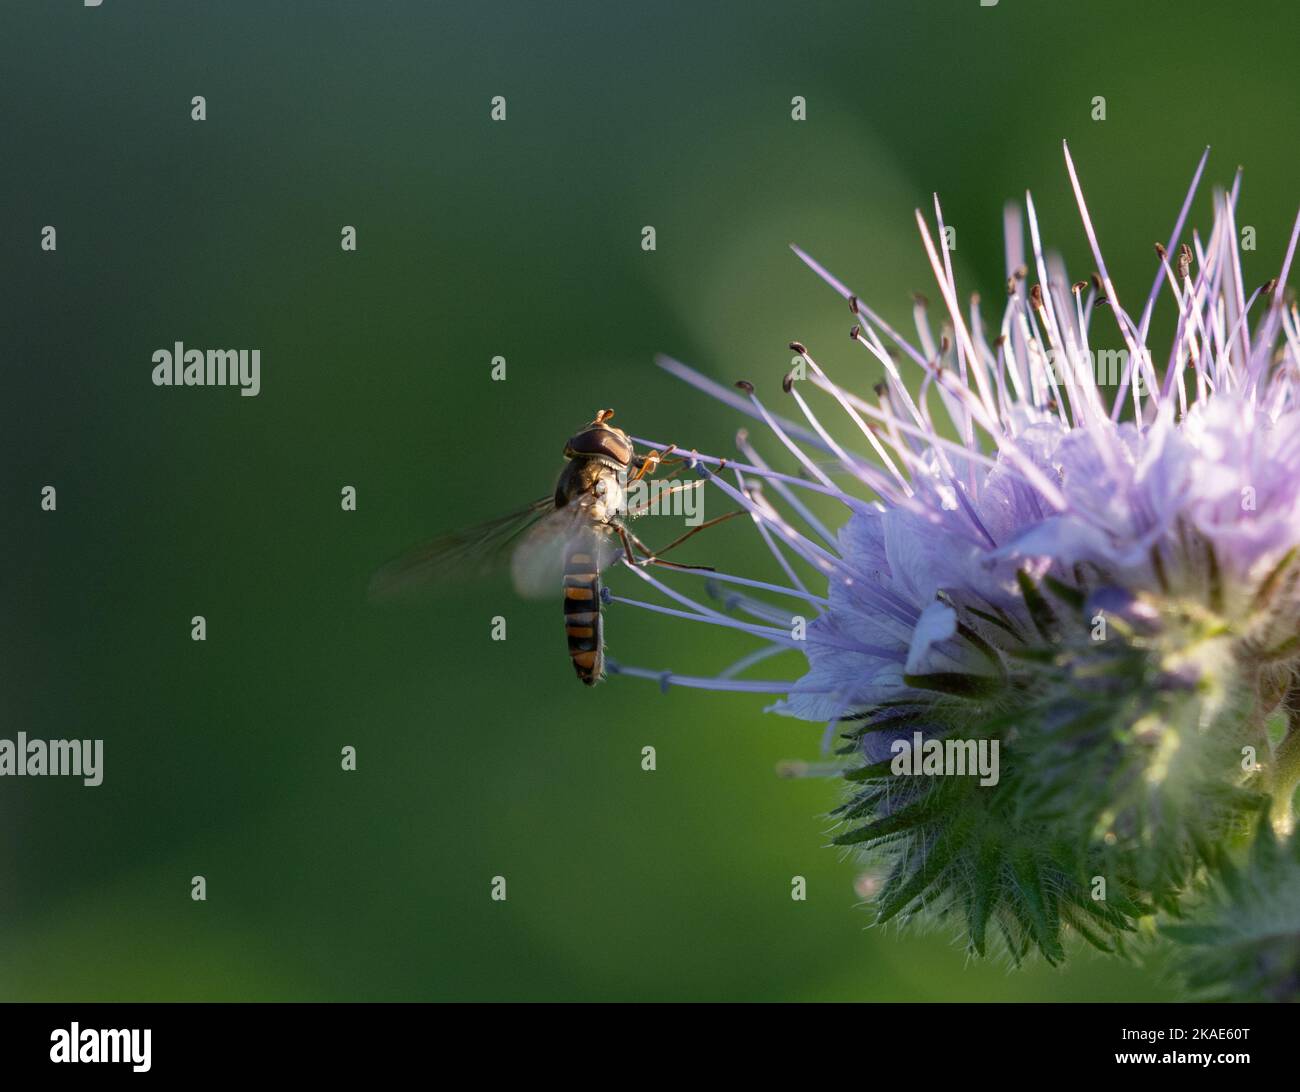 Hover fly on green crop Phacelia bloom Stock Photo